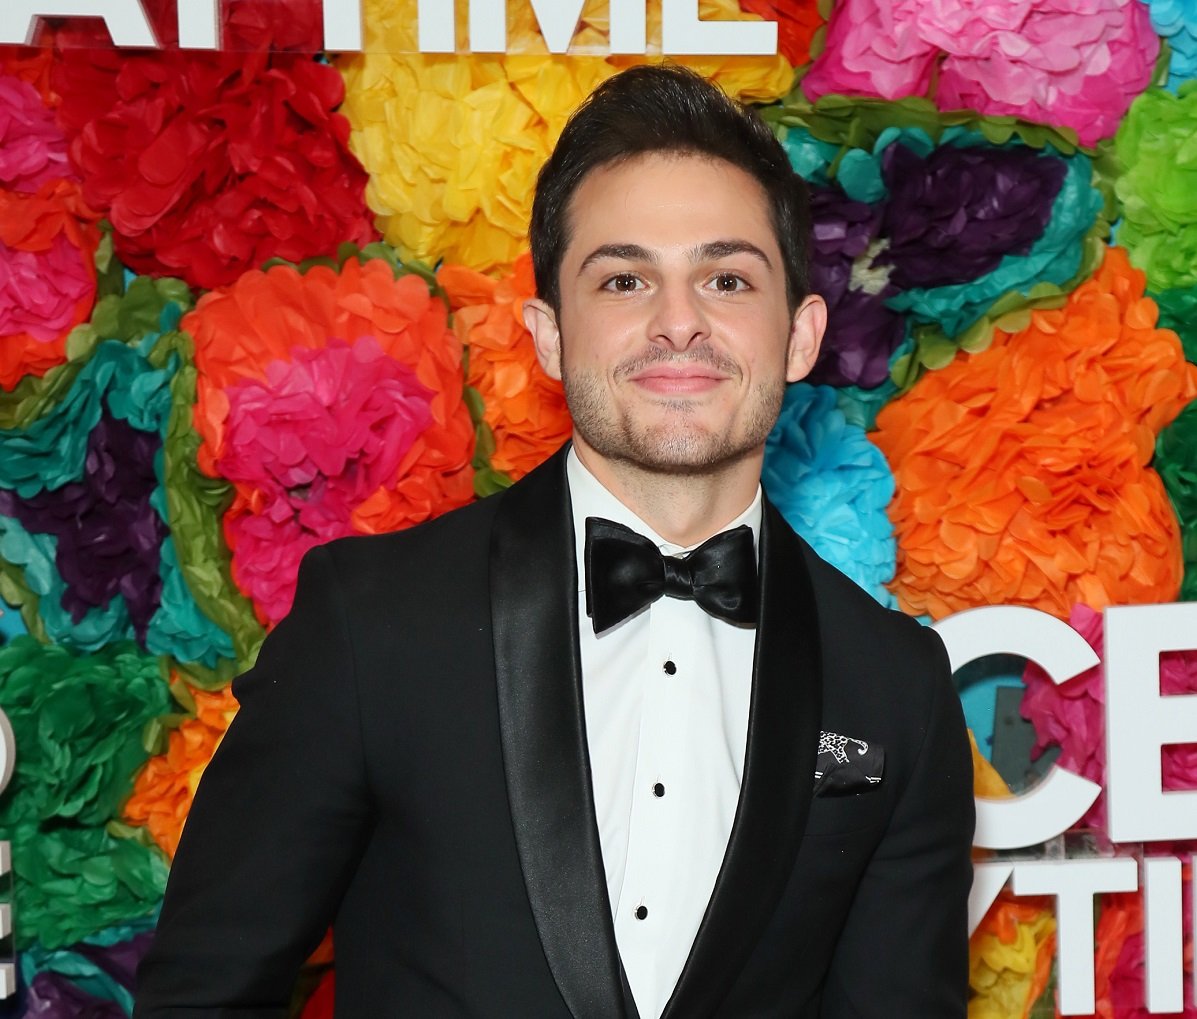 'The Young and the Restless' star Zach Tinker in a tuxedo poses on the red carpet.